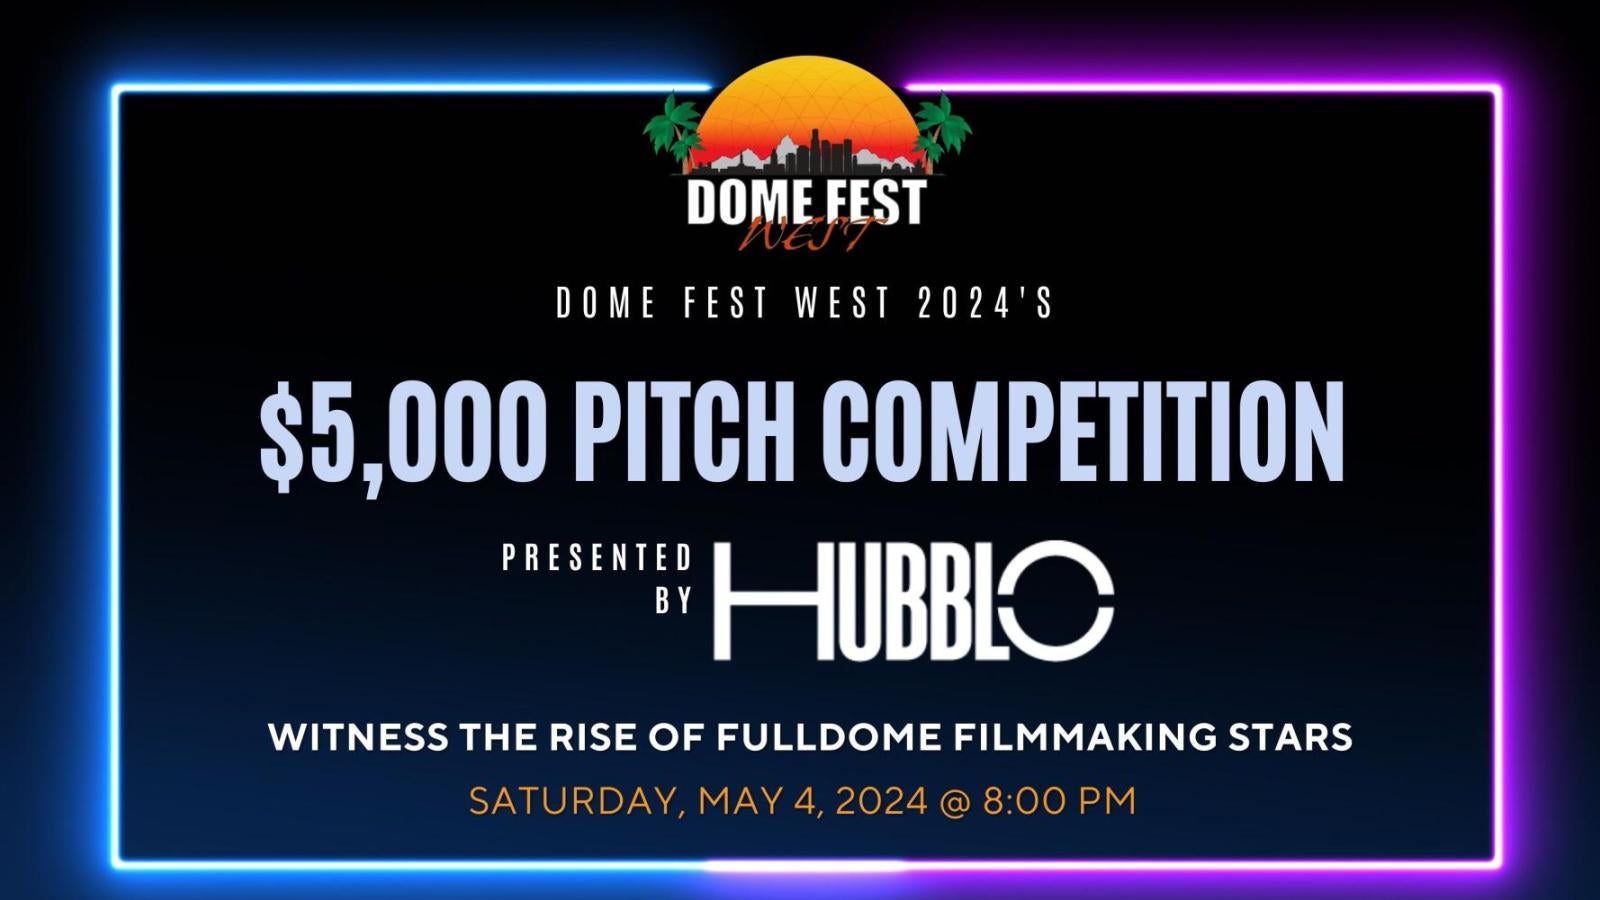 5,000 Pitch competition presented by hubblo text with dome fest west logo surrounded by blue and purple laser rectangle